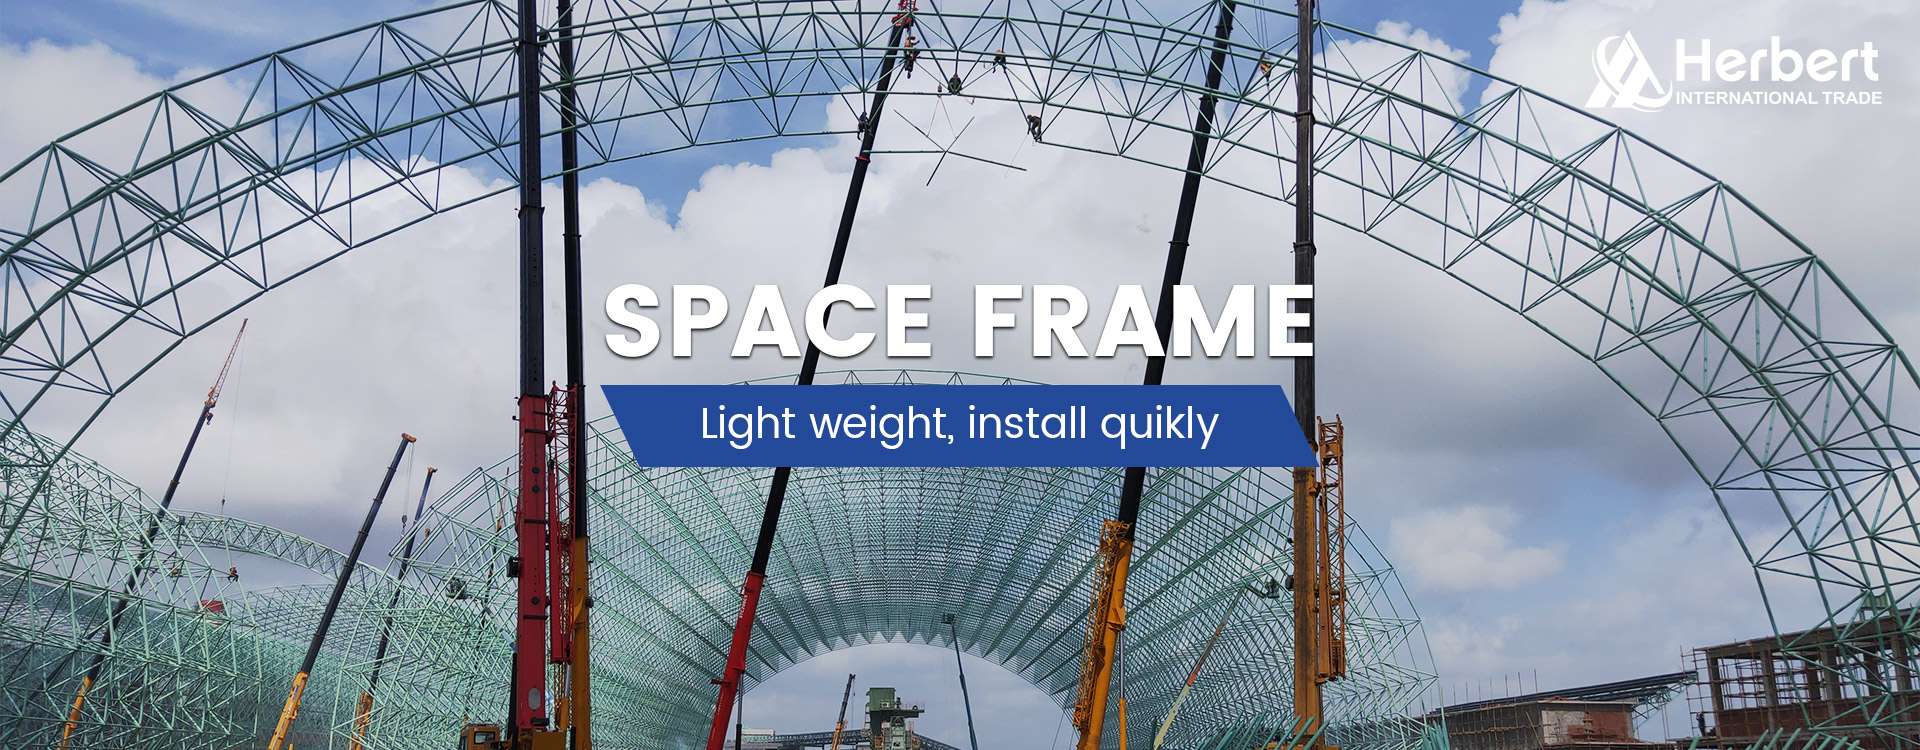 Space frame structures fabrication